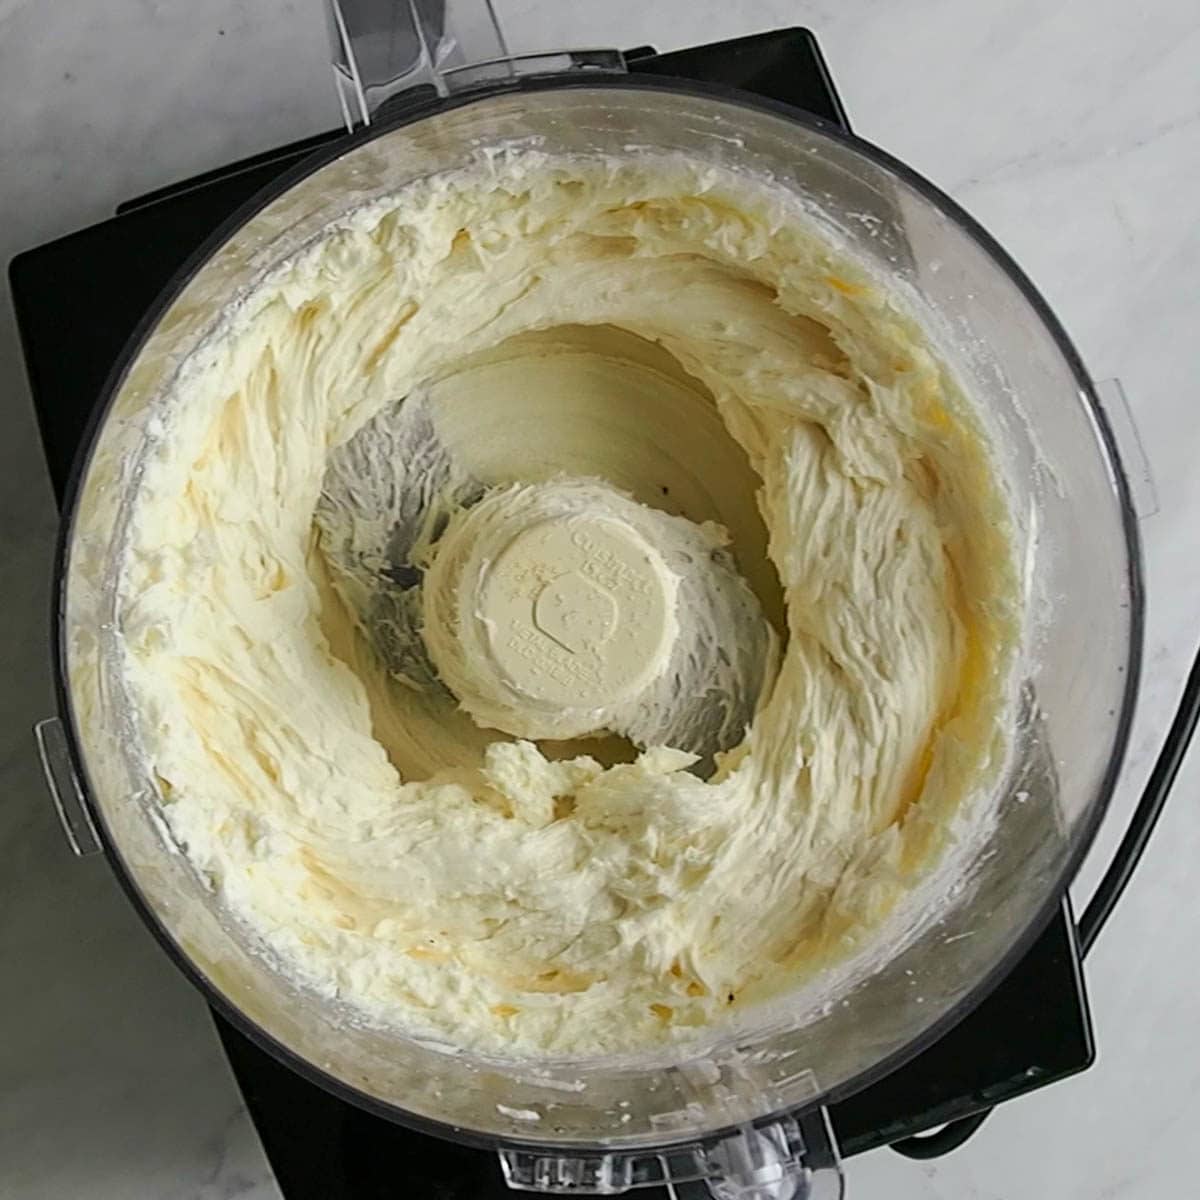 mixing the cream cheese and sugar